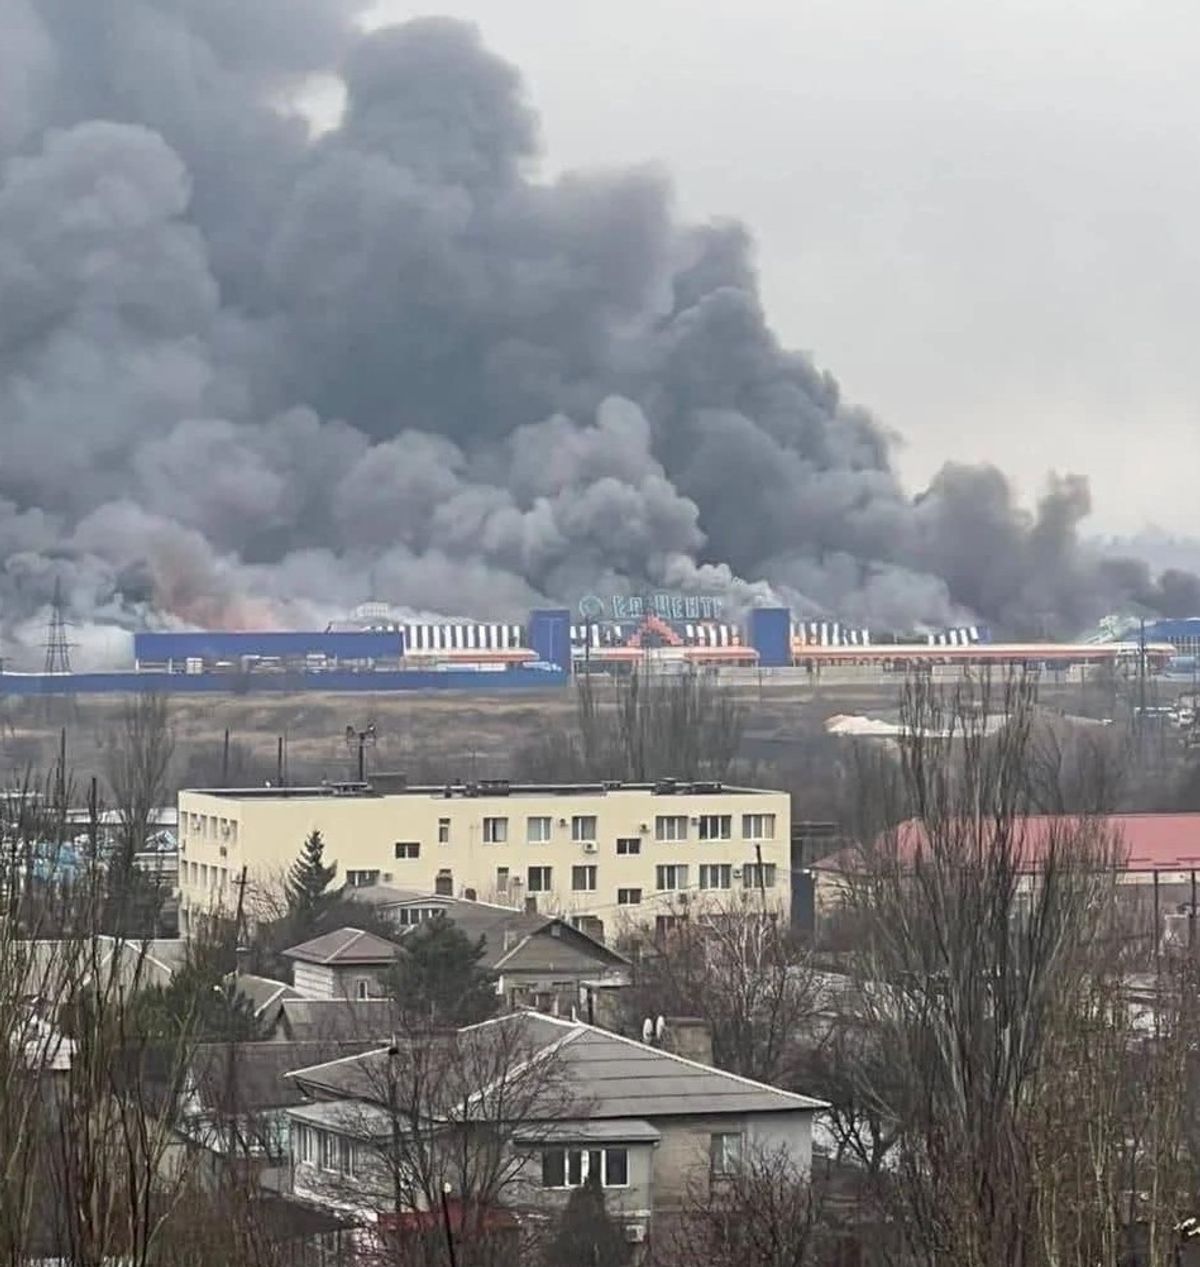 Russian troops have shelled the besieged port city of Mariupol, Ukraine for over a week. Wikicommons